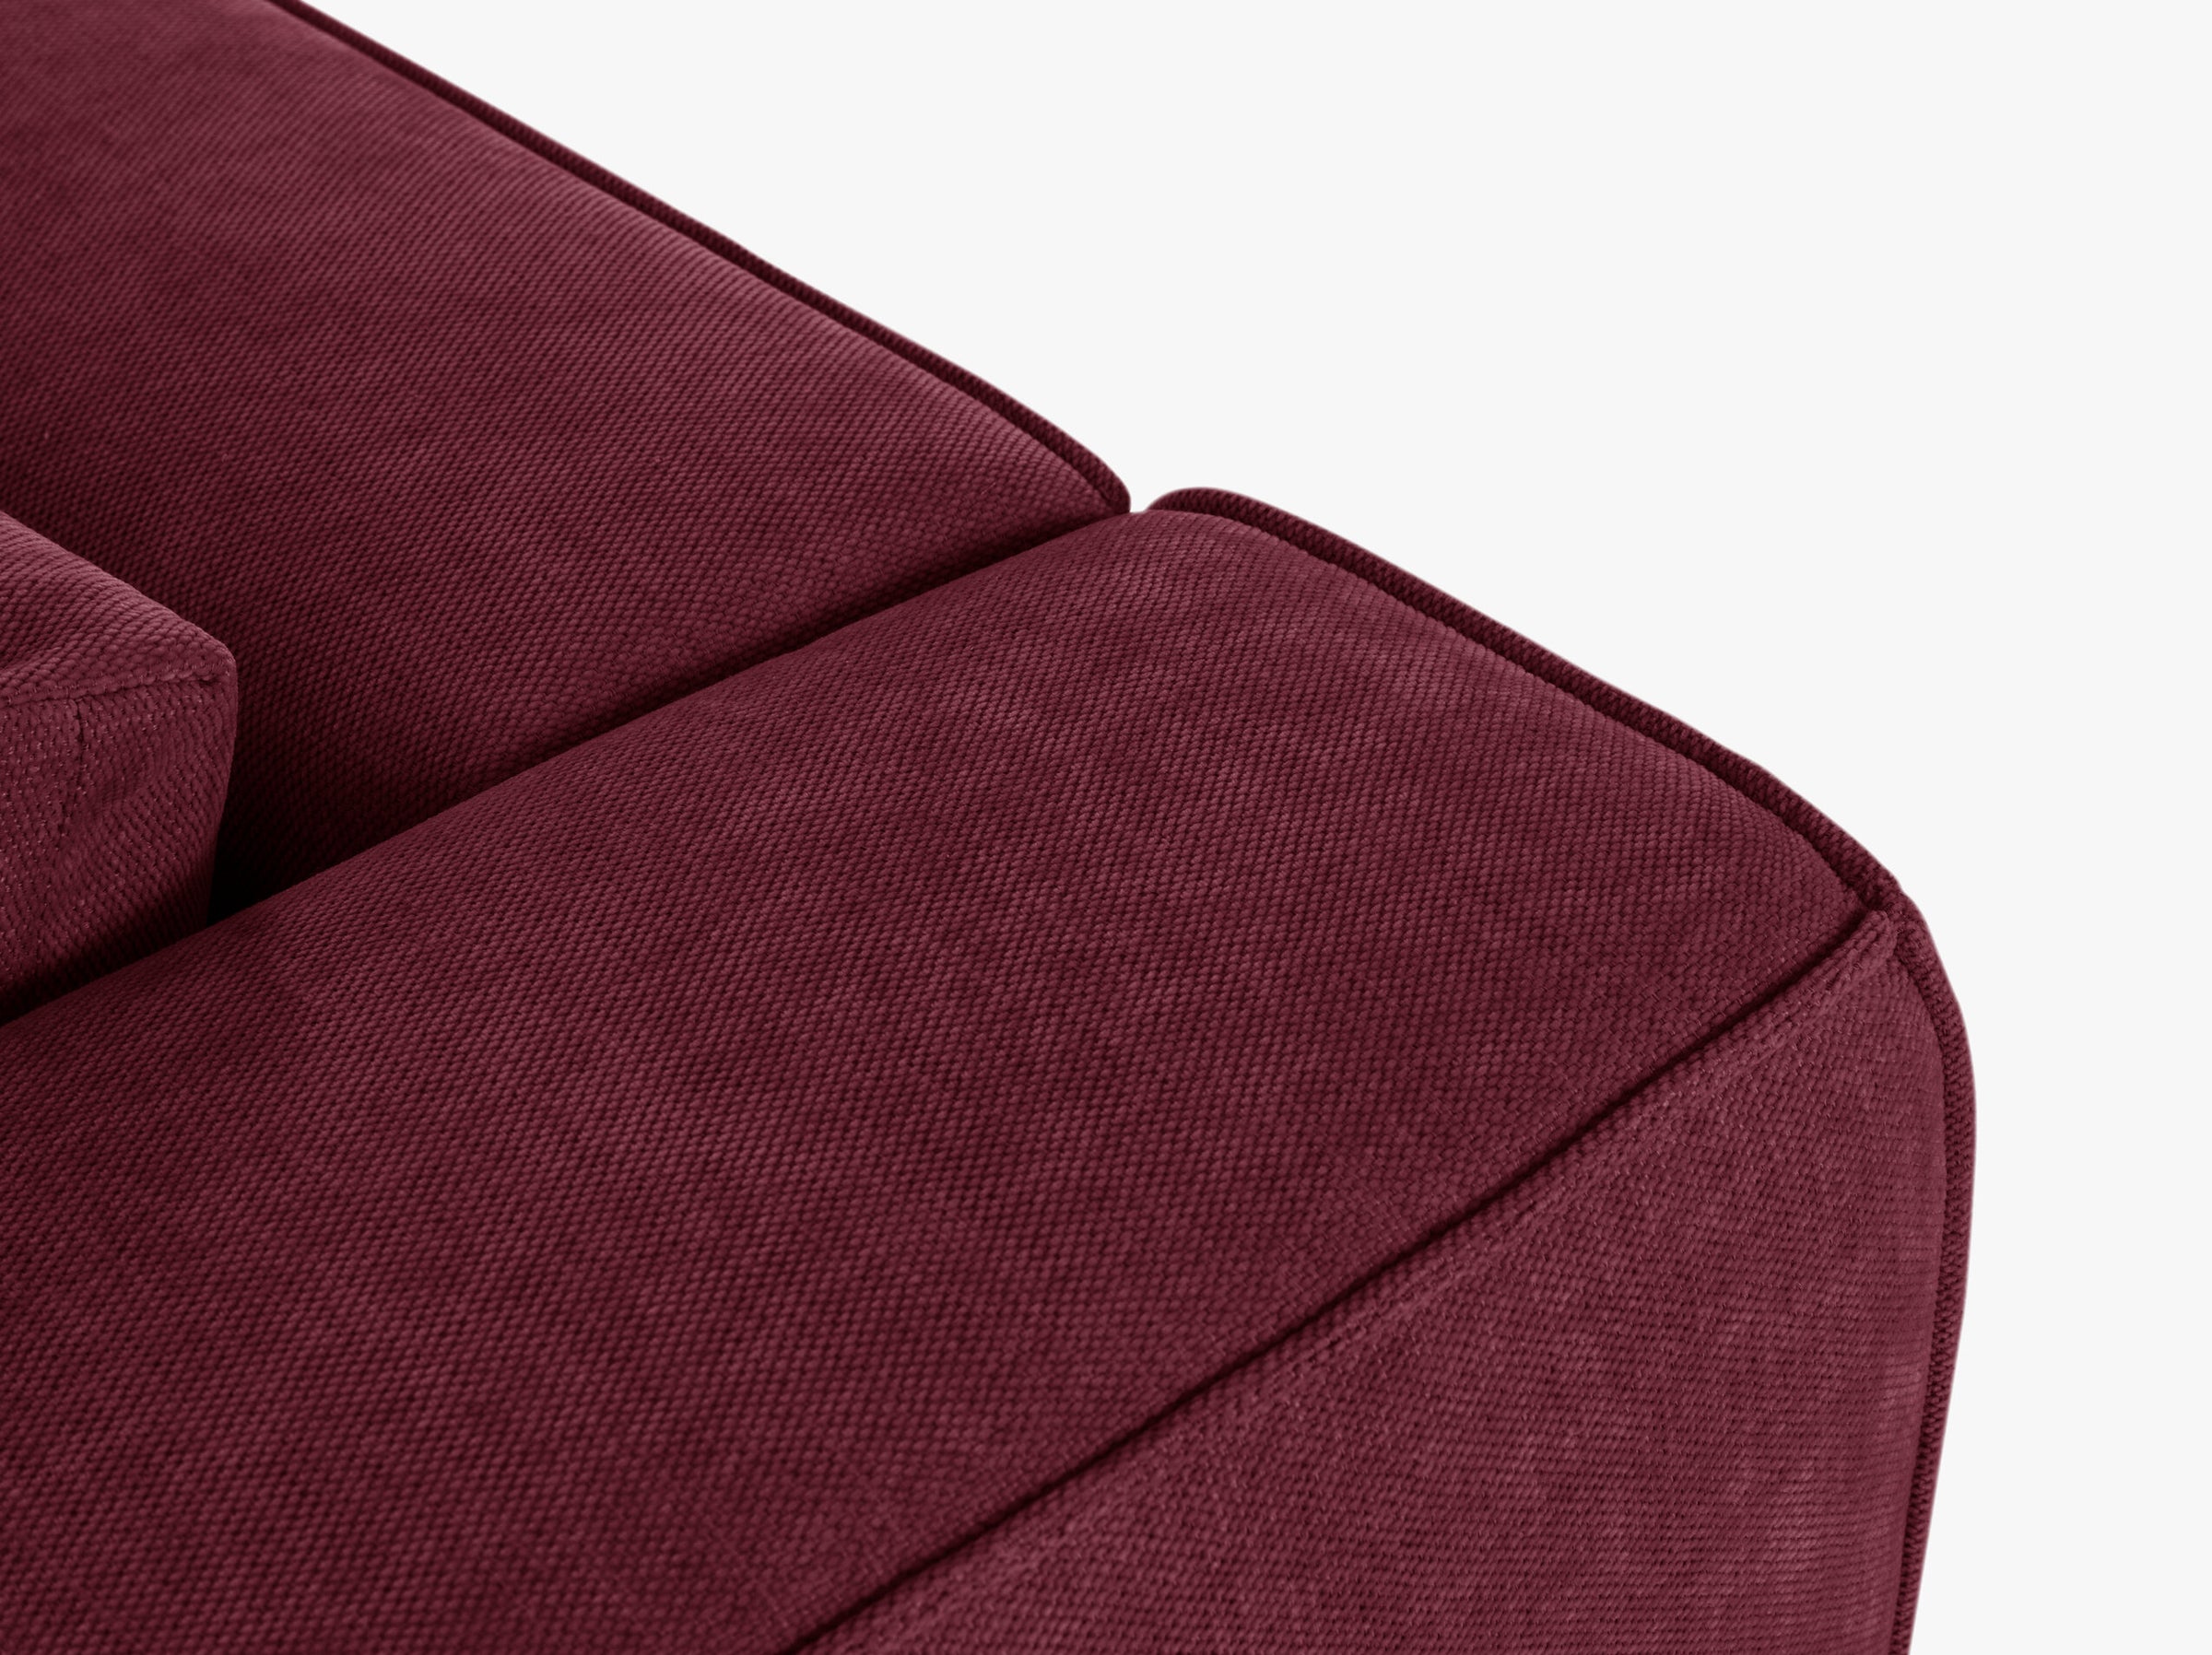 Tyra sofas structured fabric bordeaux